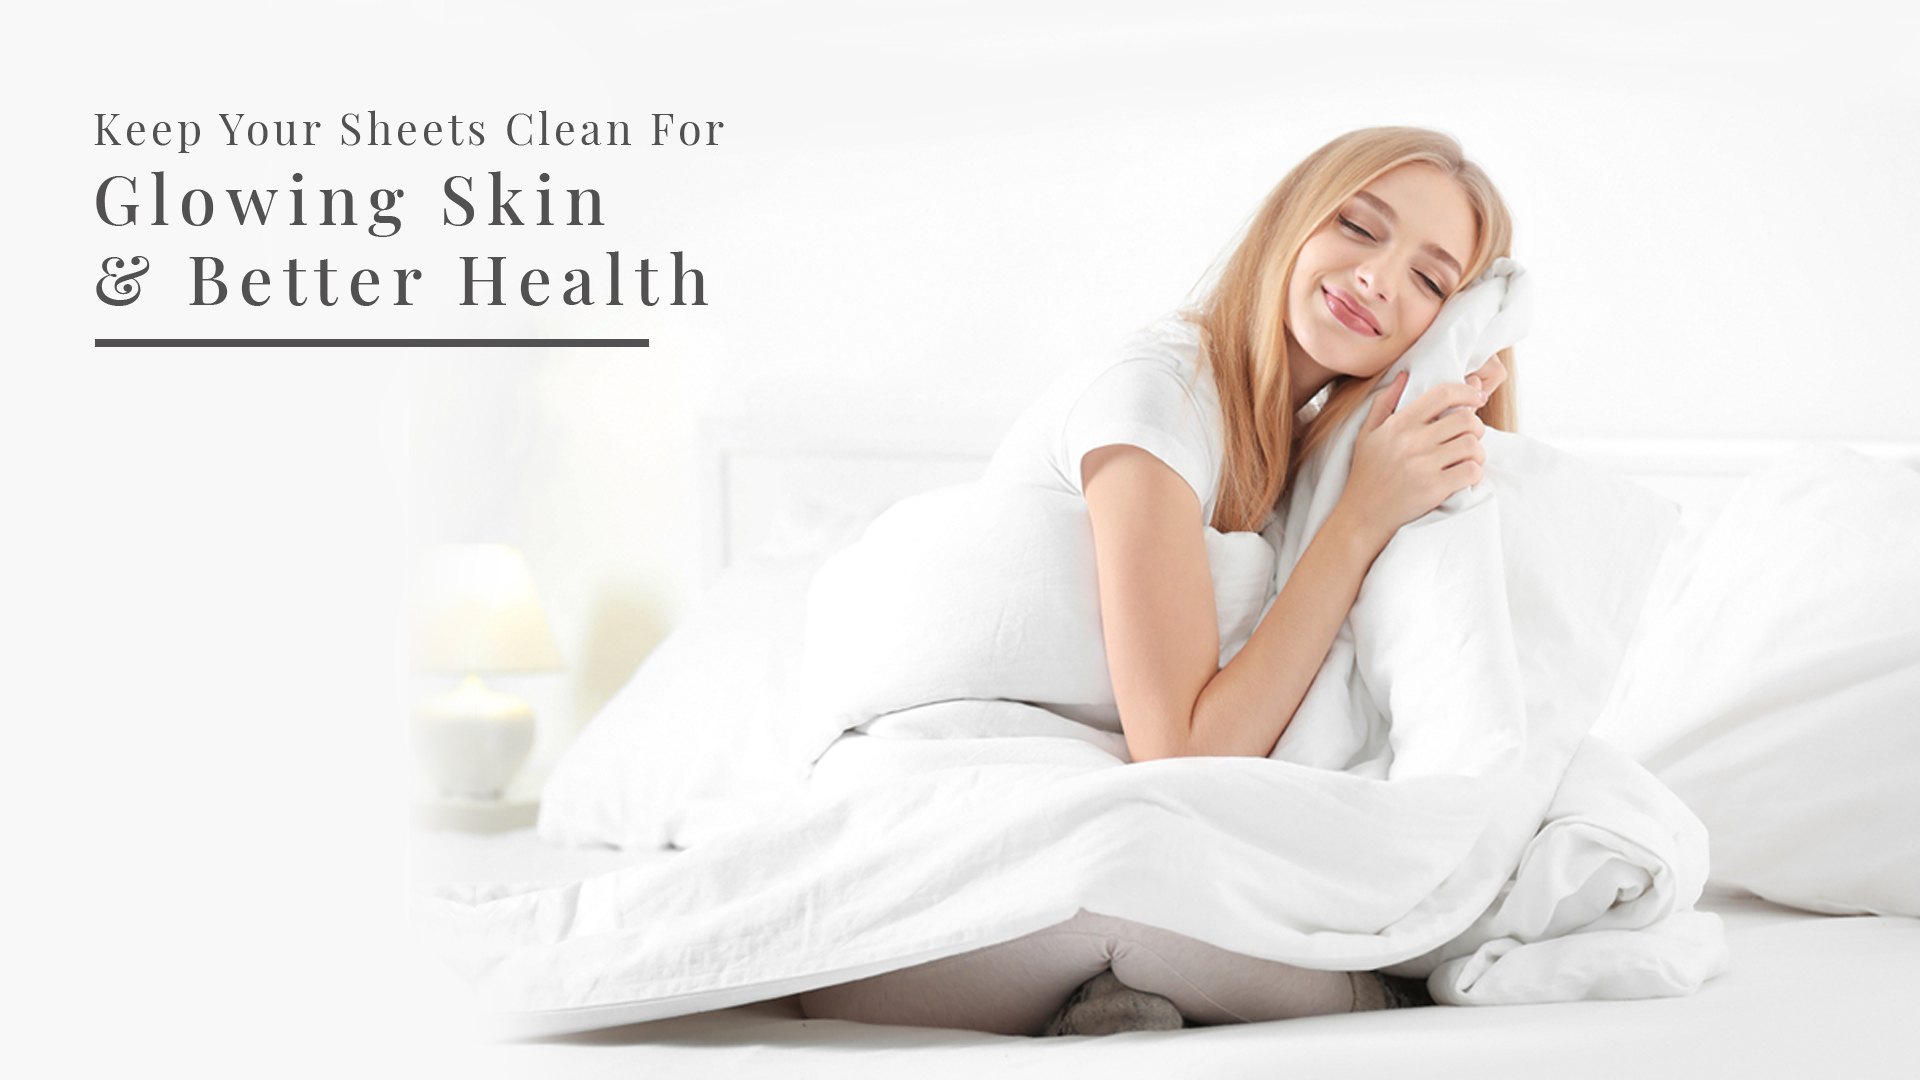 Keep Your Sheets Clean For Glowing Skin & Better Health